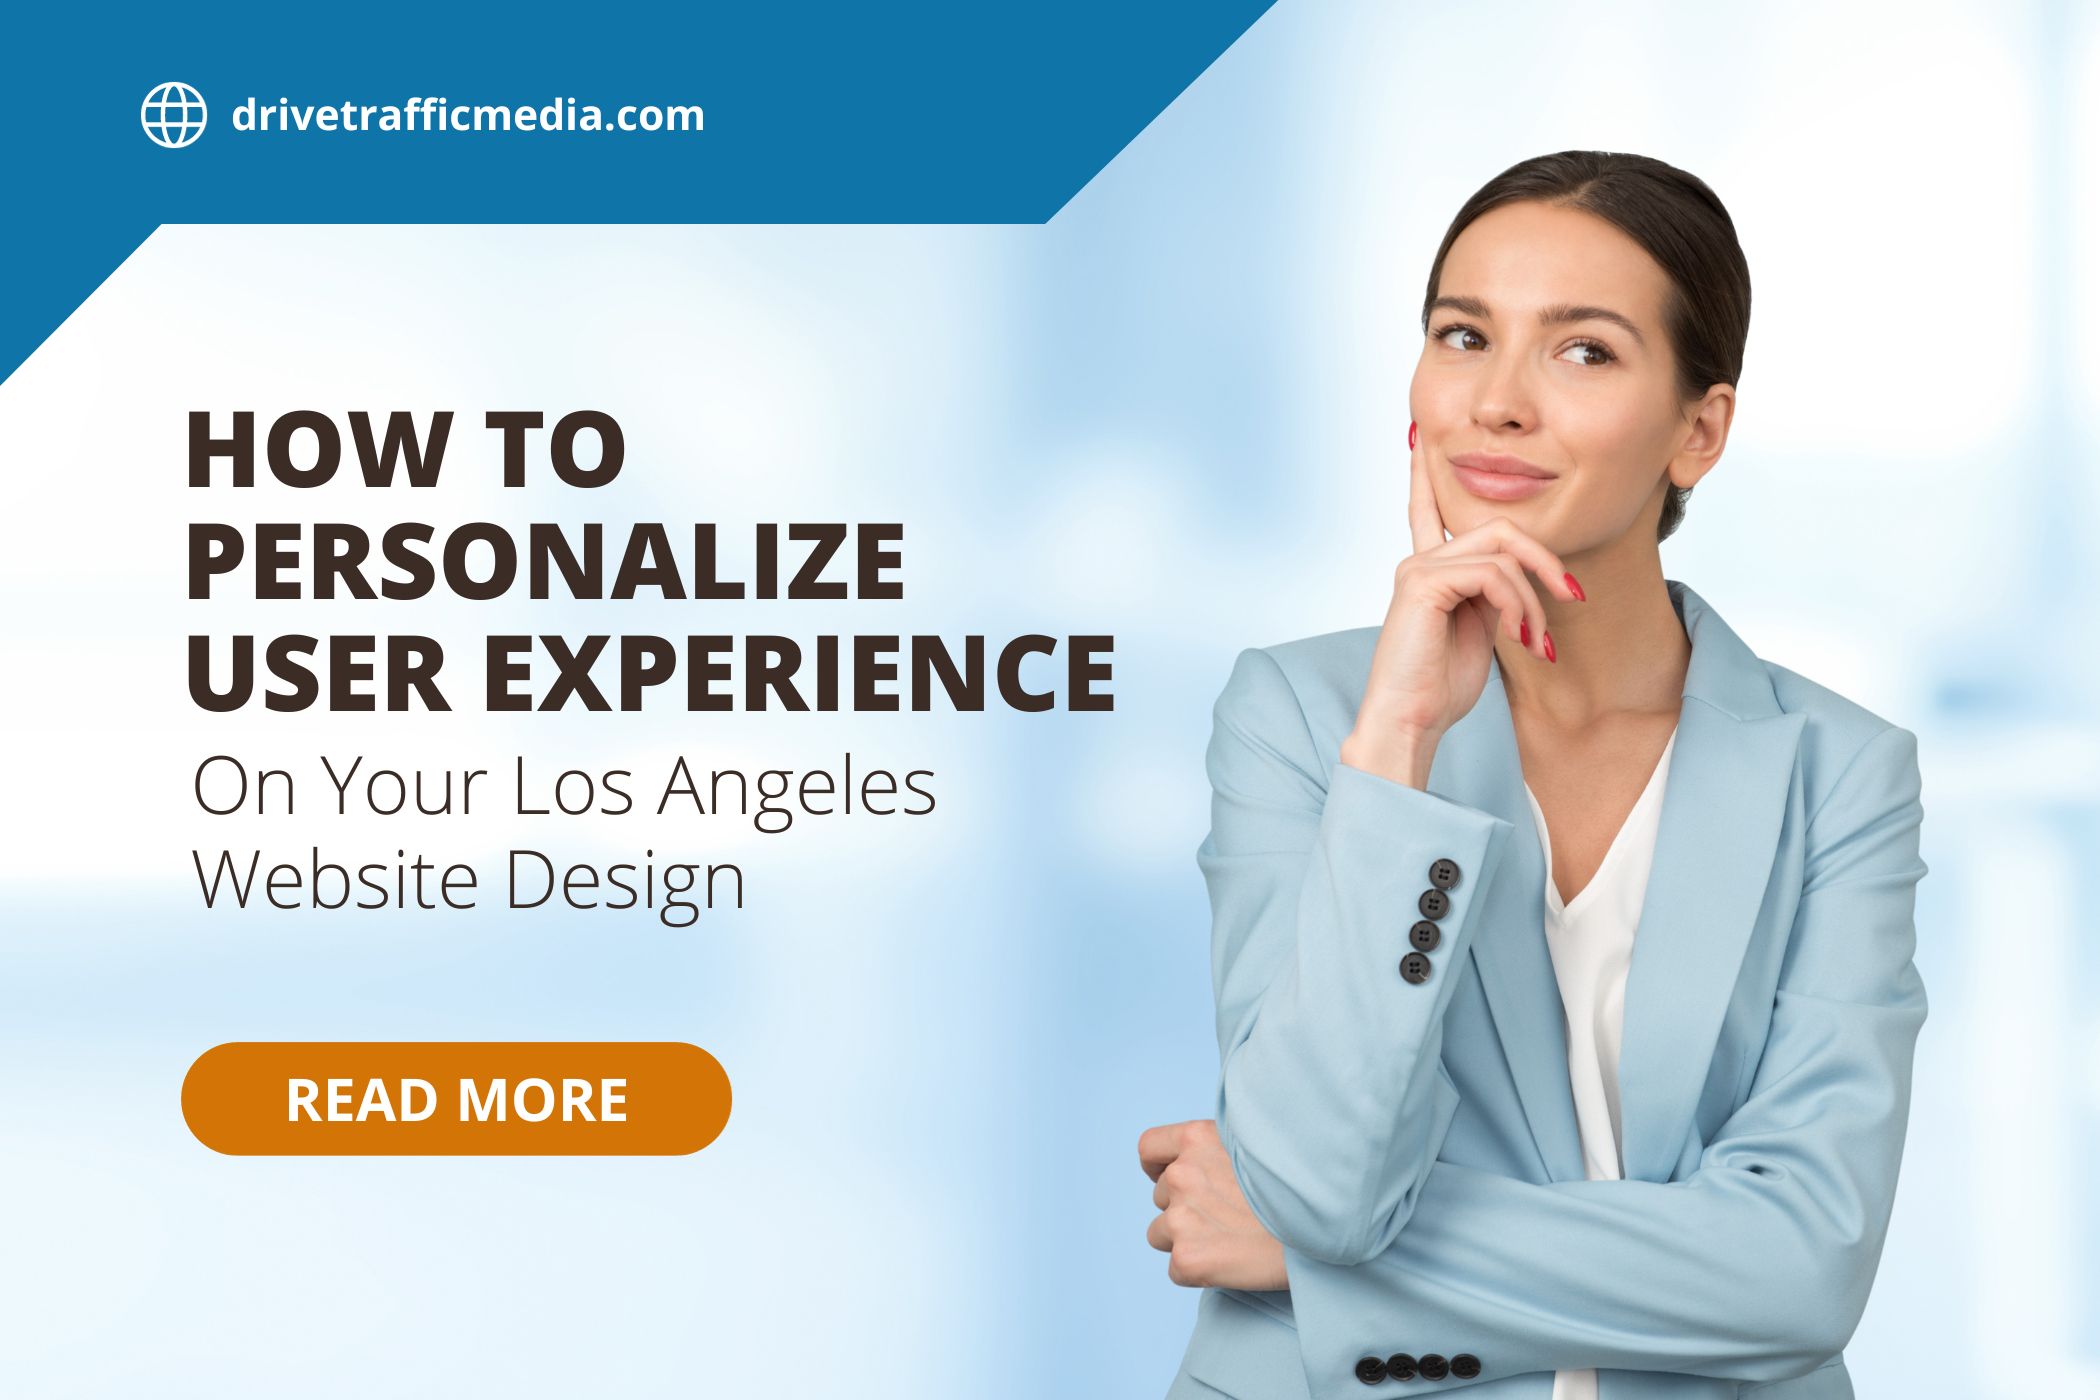 Why-customer-experience-needs-to-be-personalized-on-your-Los-Angeles-web-design-1200-x-800